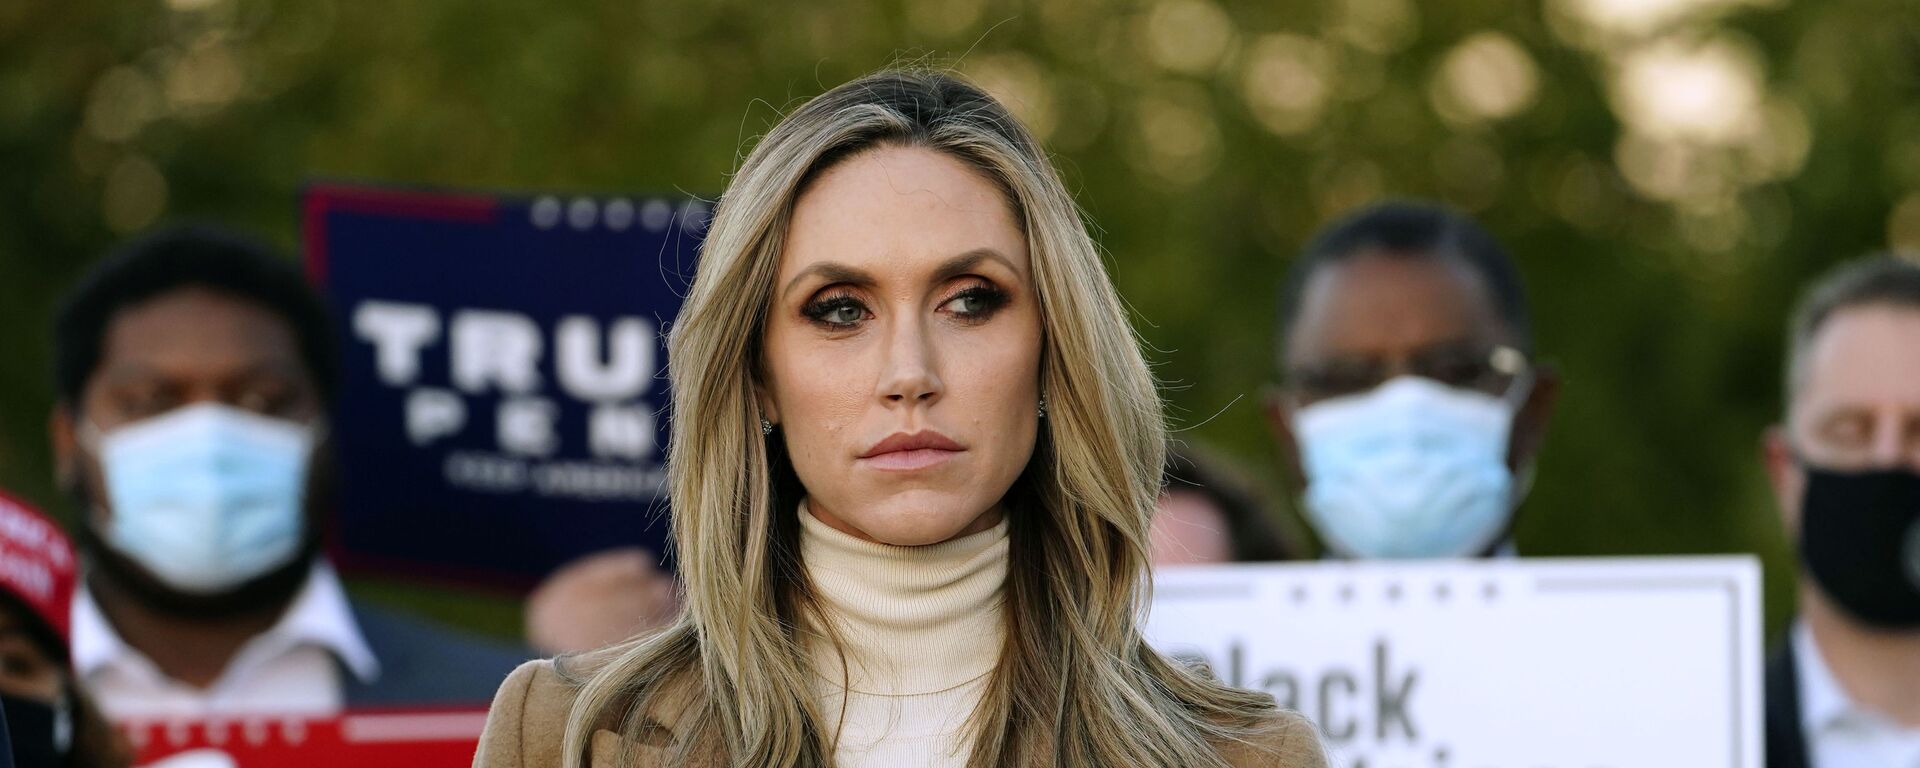 Lara Trump, daughter-in-law of President Donald Trump listens to Rudy Giuliani, a lawyer for President Trump, speak during a news conference on legal challenges to vote counting in Pennsylvania, Wednesday, Nov. 4, 2020, in Philadelphia - Sputnik International, 1920, 10.04.2021